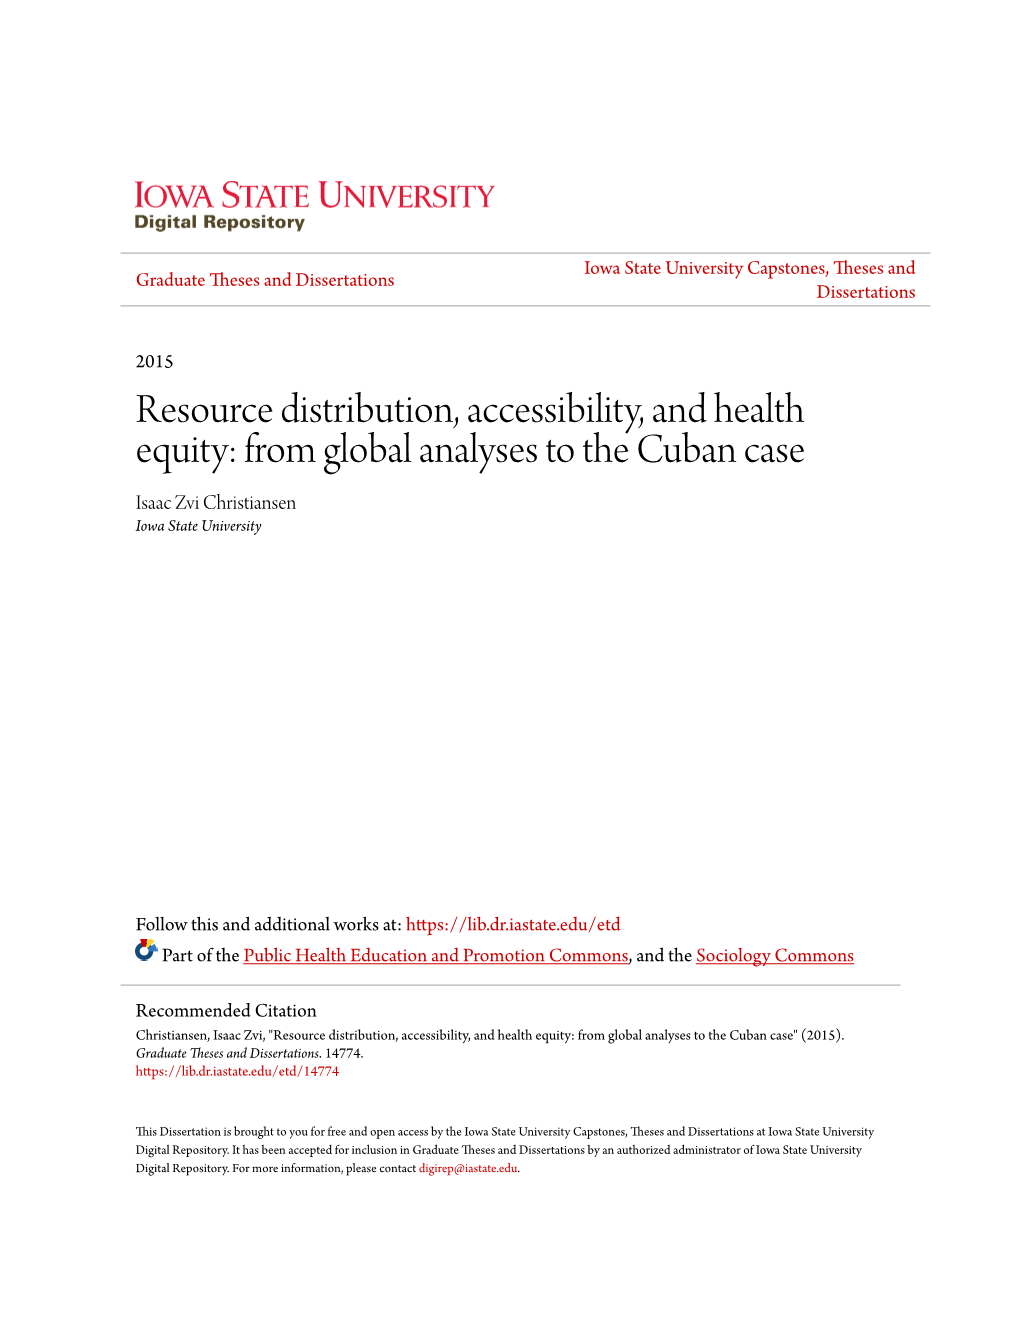 Resource Distribution, Accessibility, and Health Equity: from Global Analyses to the Cuban Case Isaac Zvi Christiansen Iowa State University